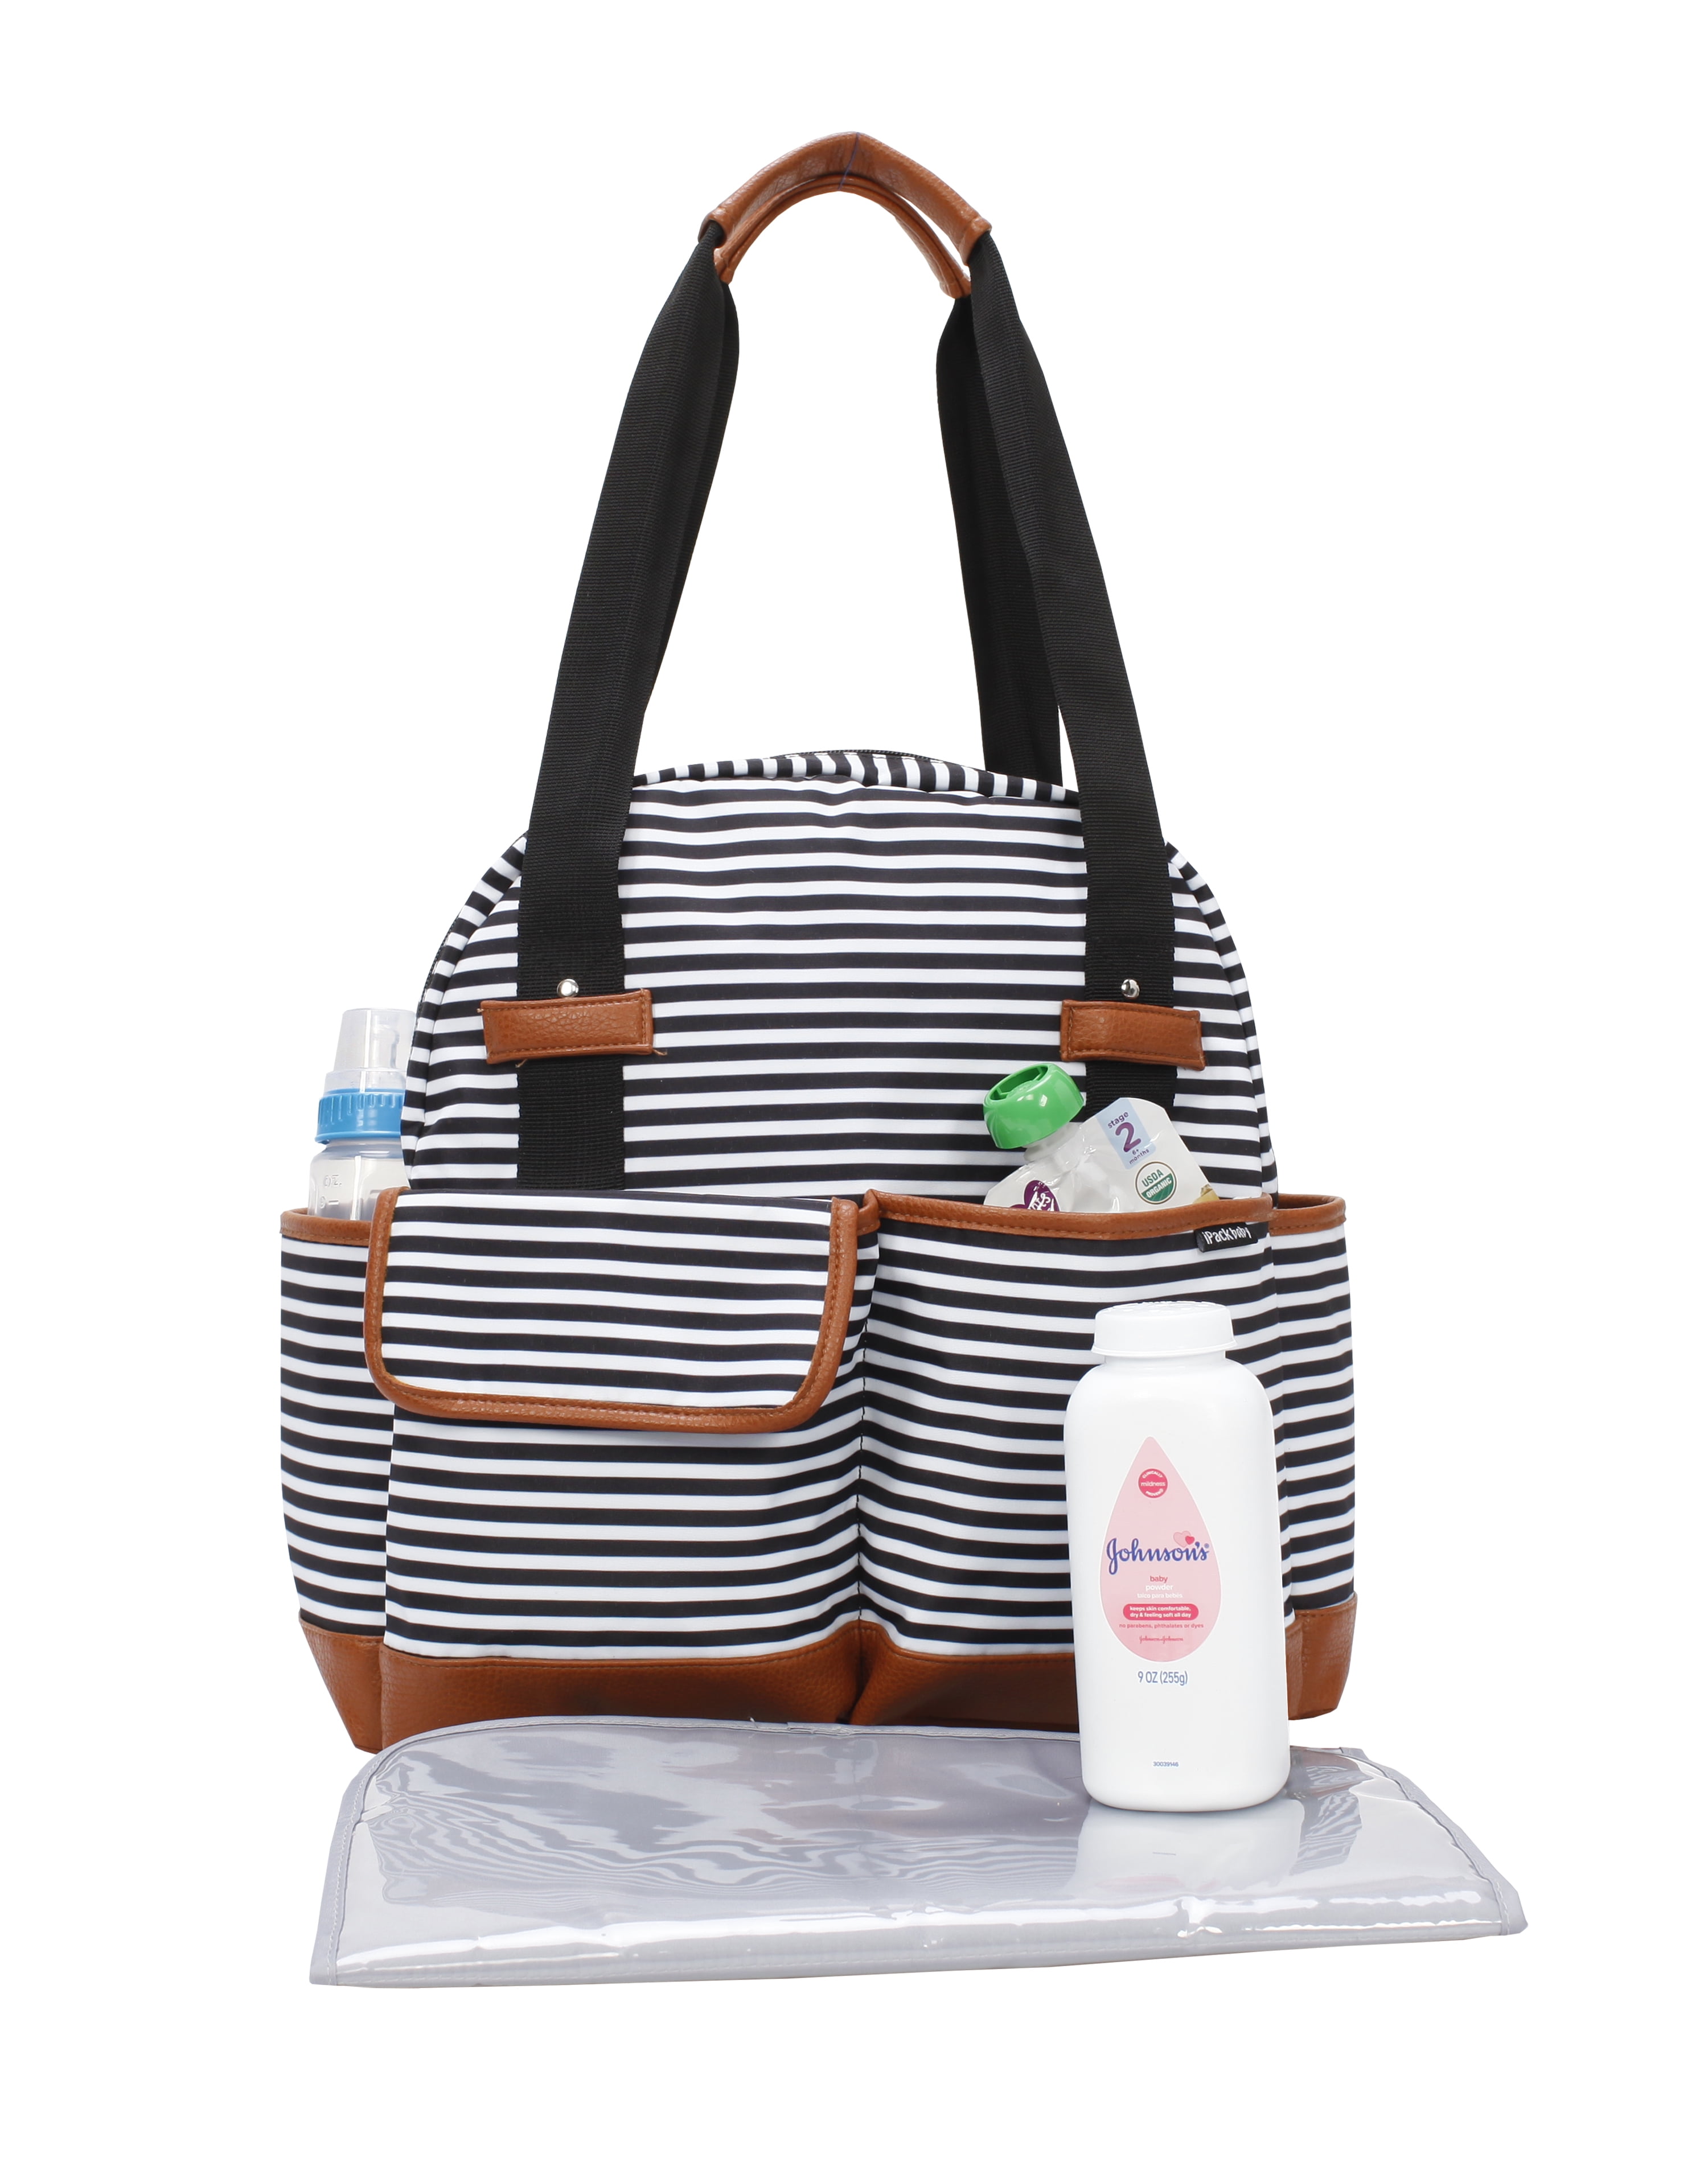 Baby Diaper Bag Single Shoulder Tote w/Changing Pad and Insulated Bottle Pocket 